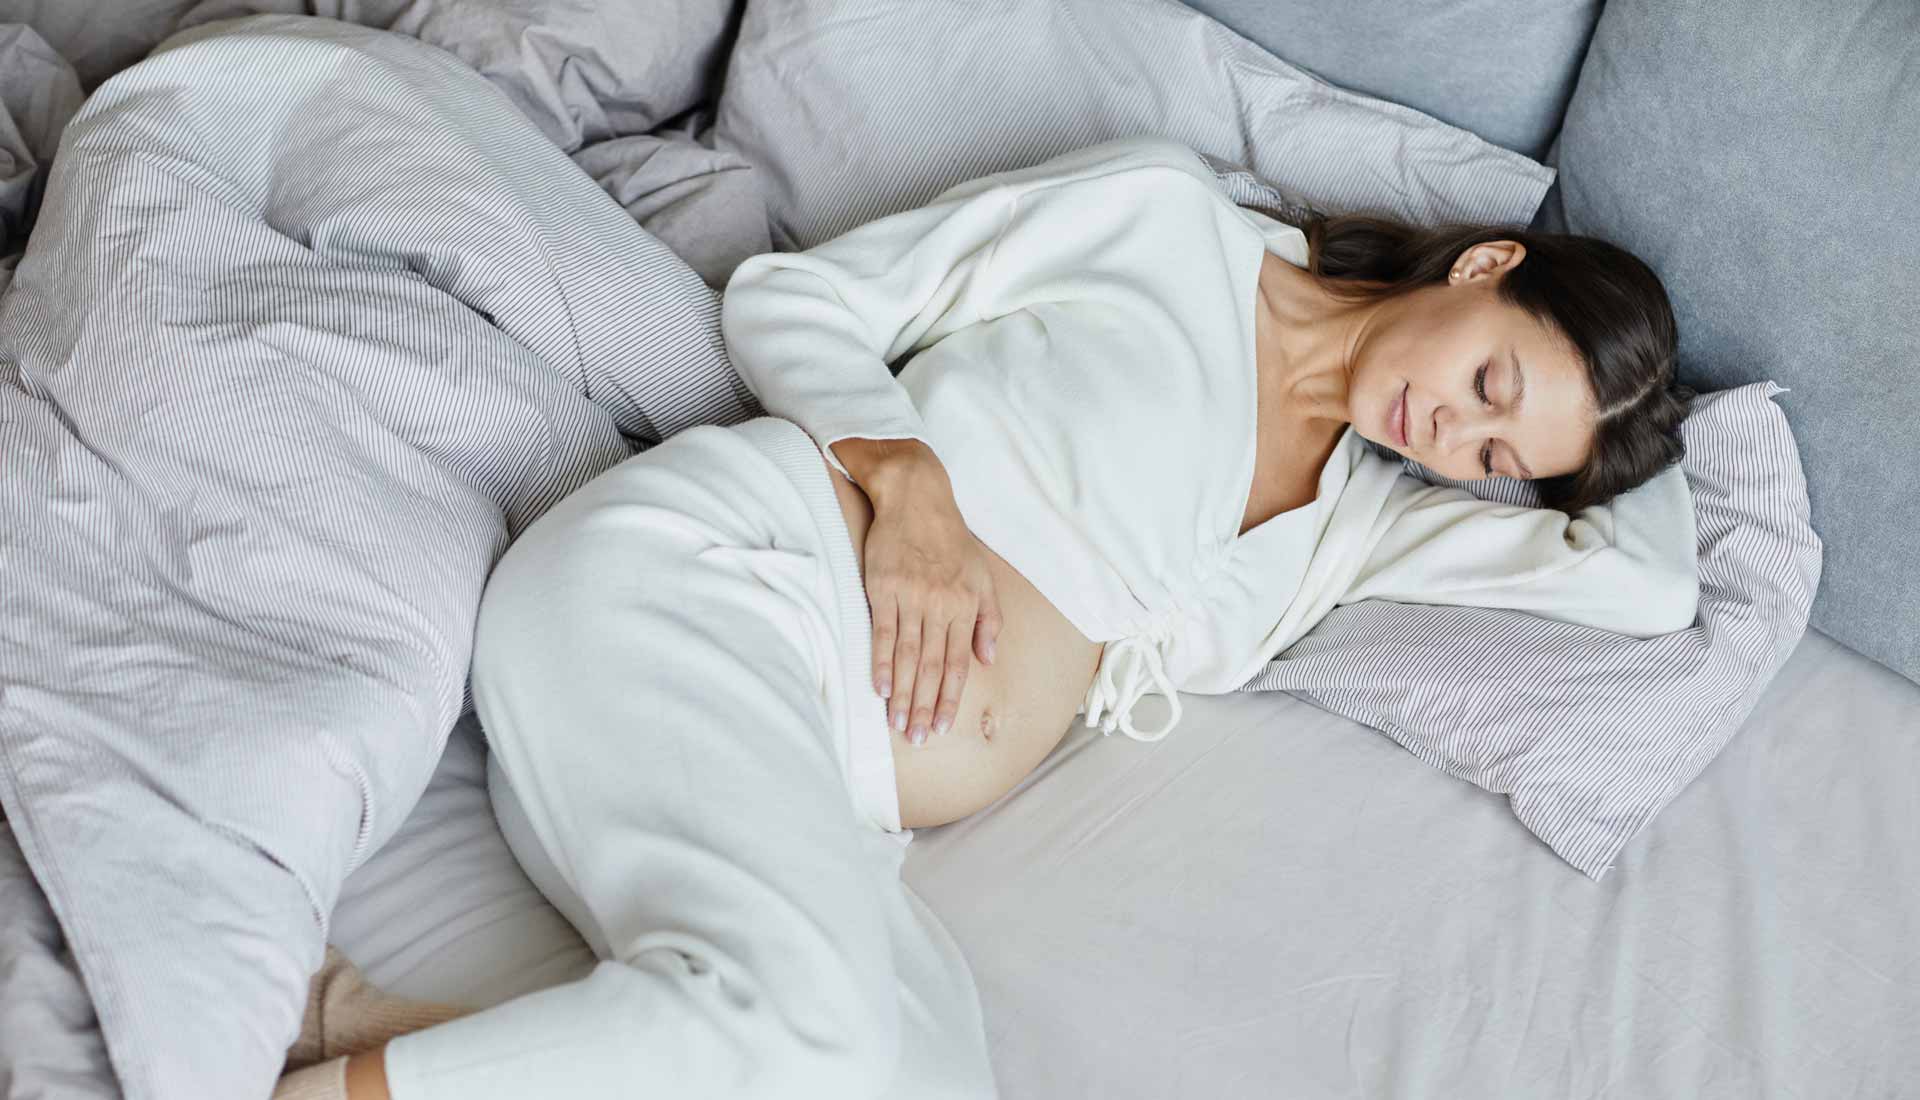 6 tips for getting better sleep when you're pregnant